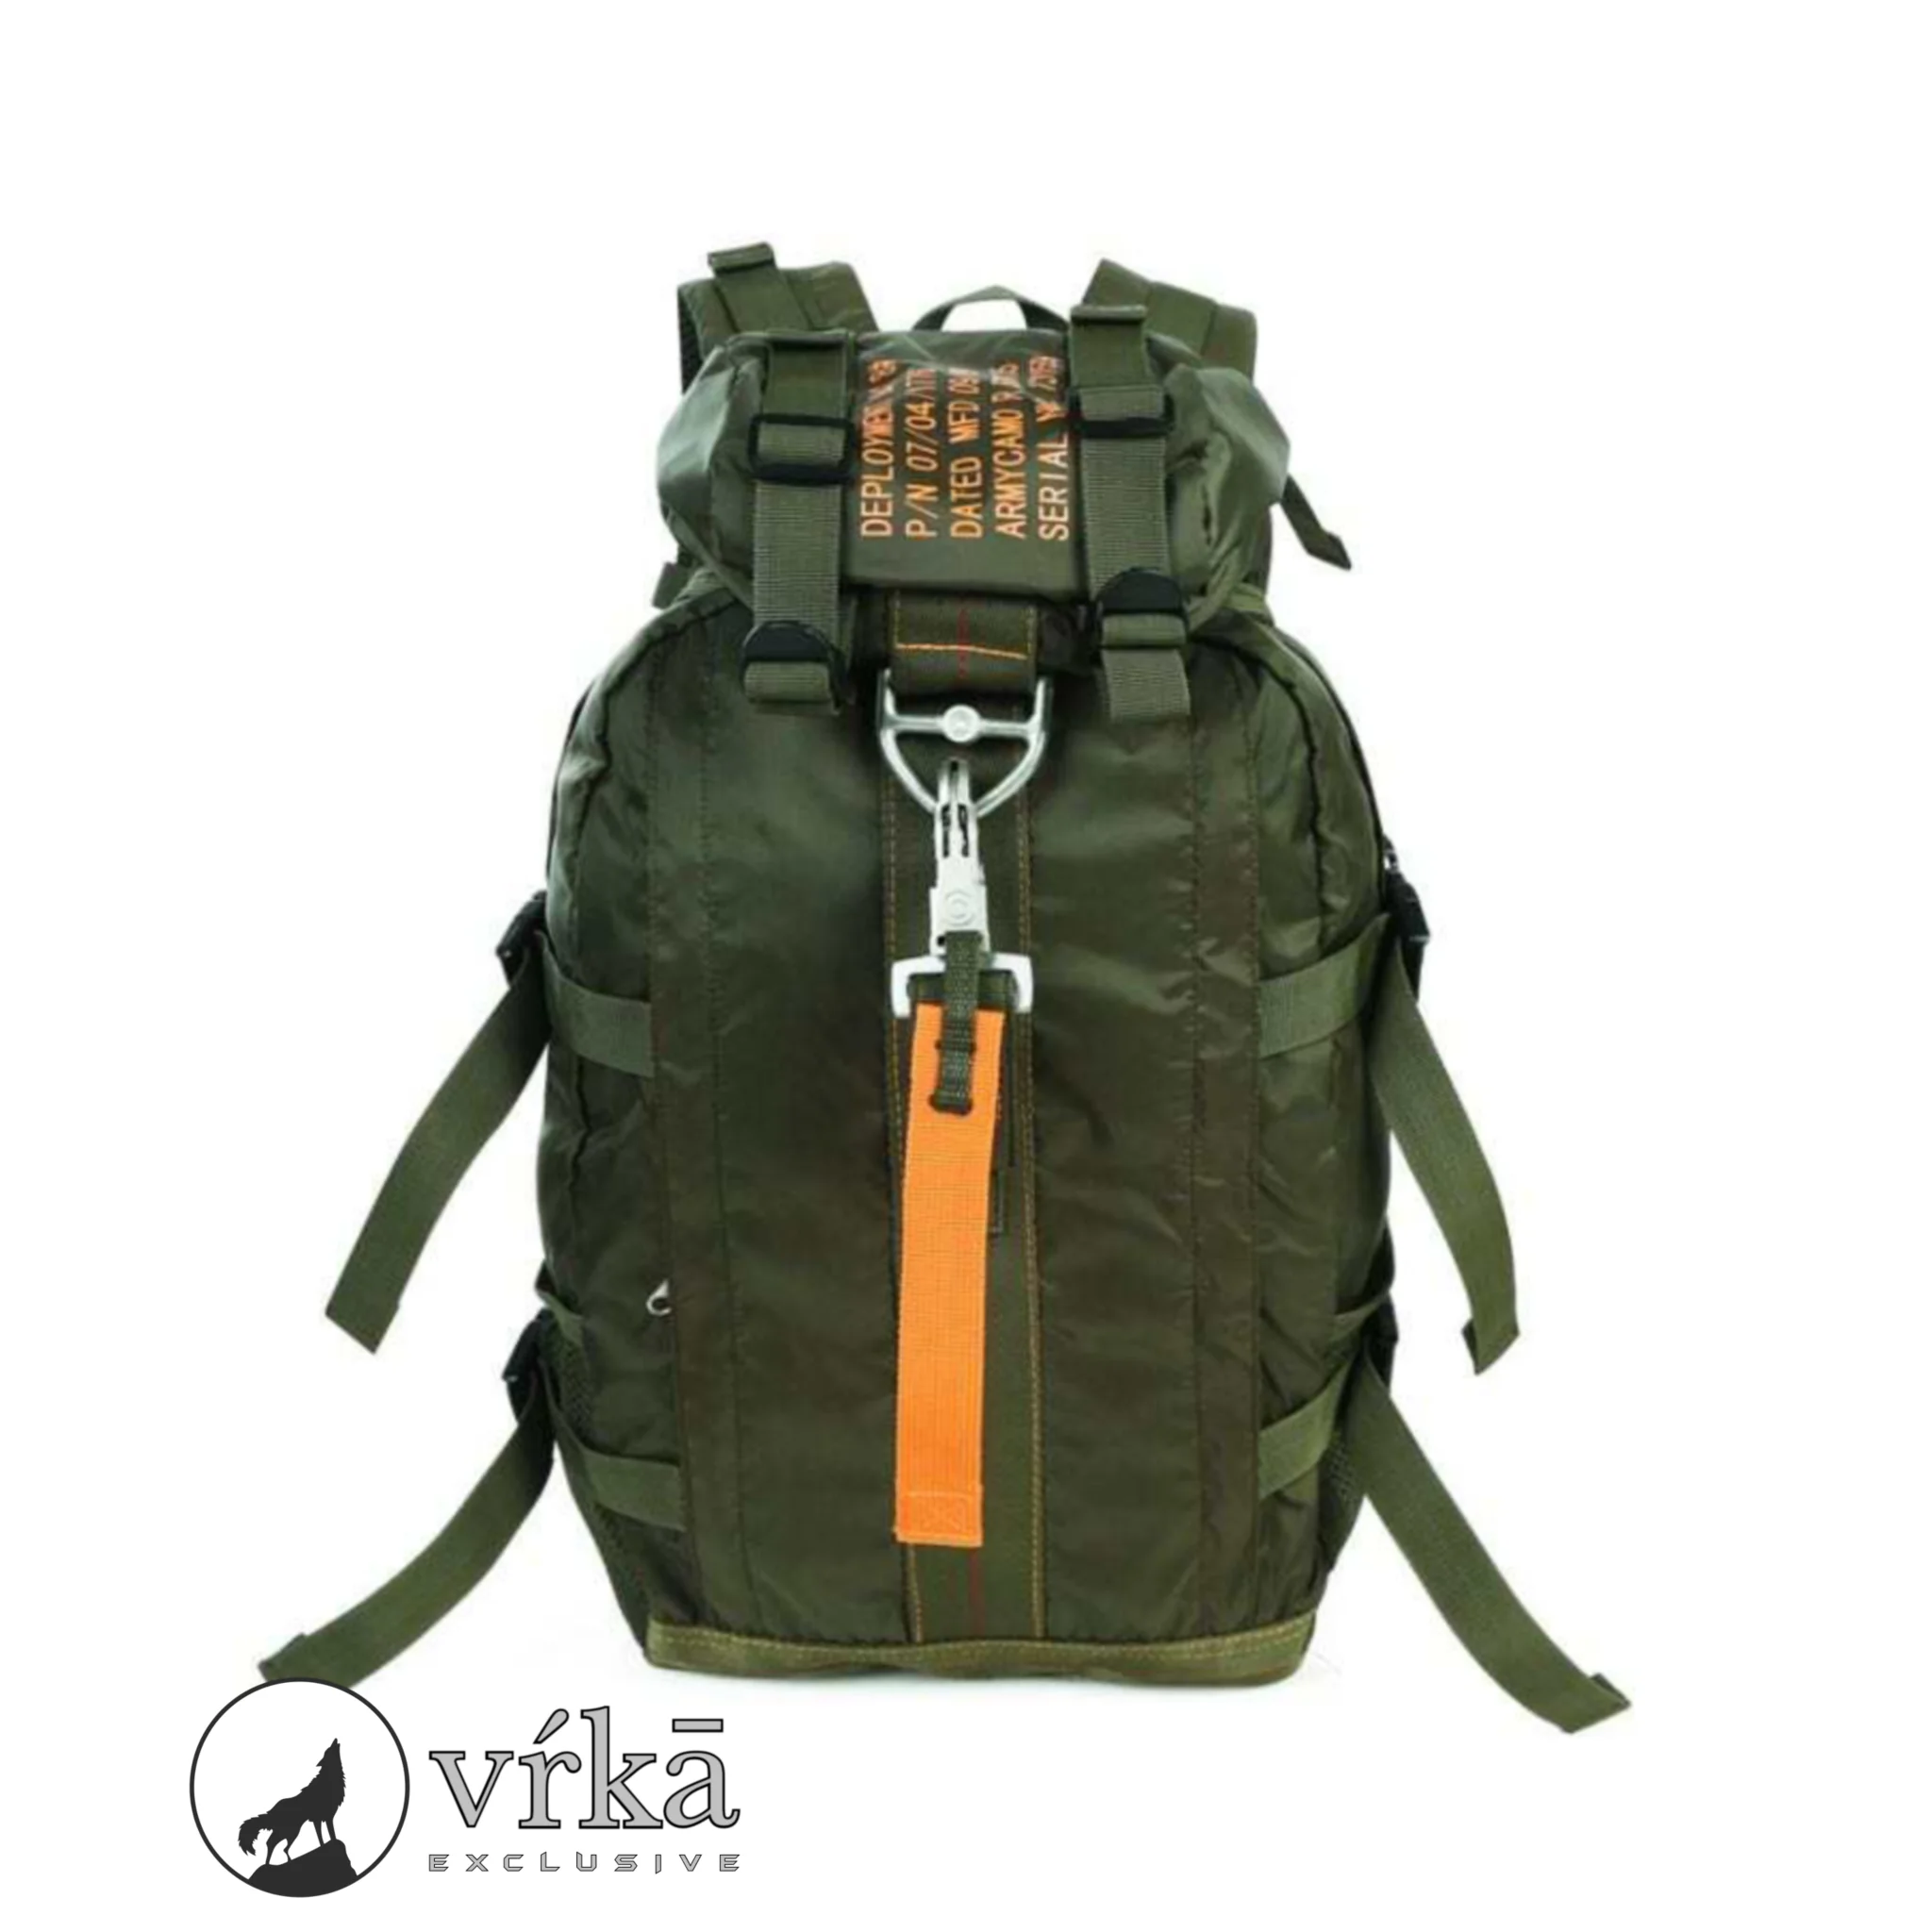 Featured image for “Parachute Deployment Bag : Assault Backpack”